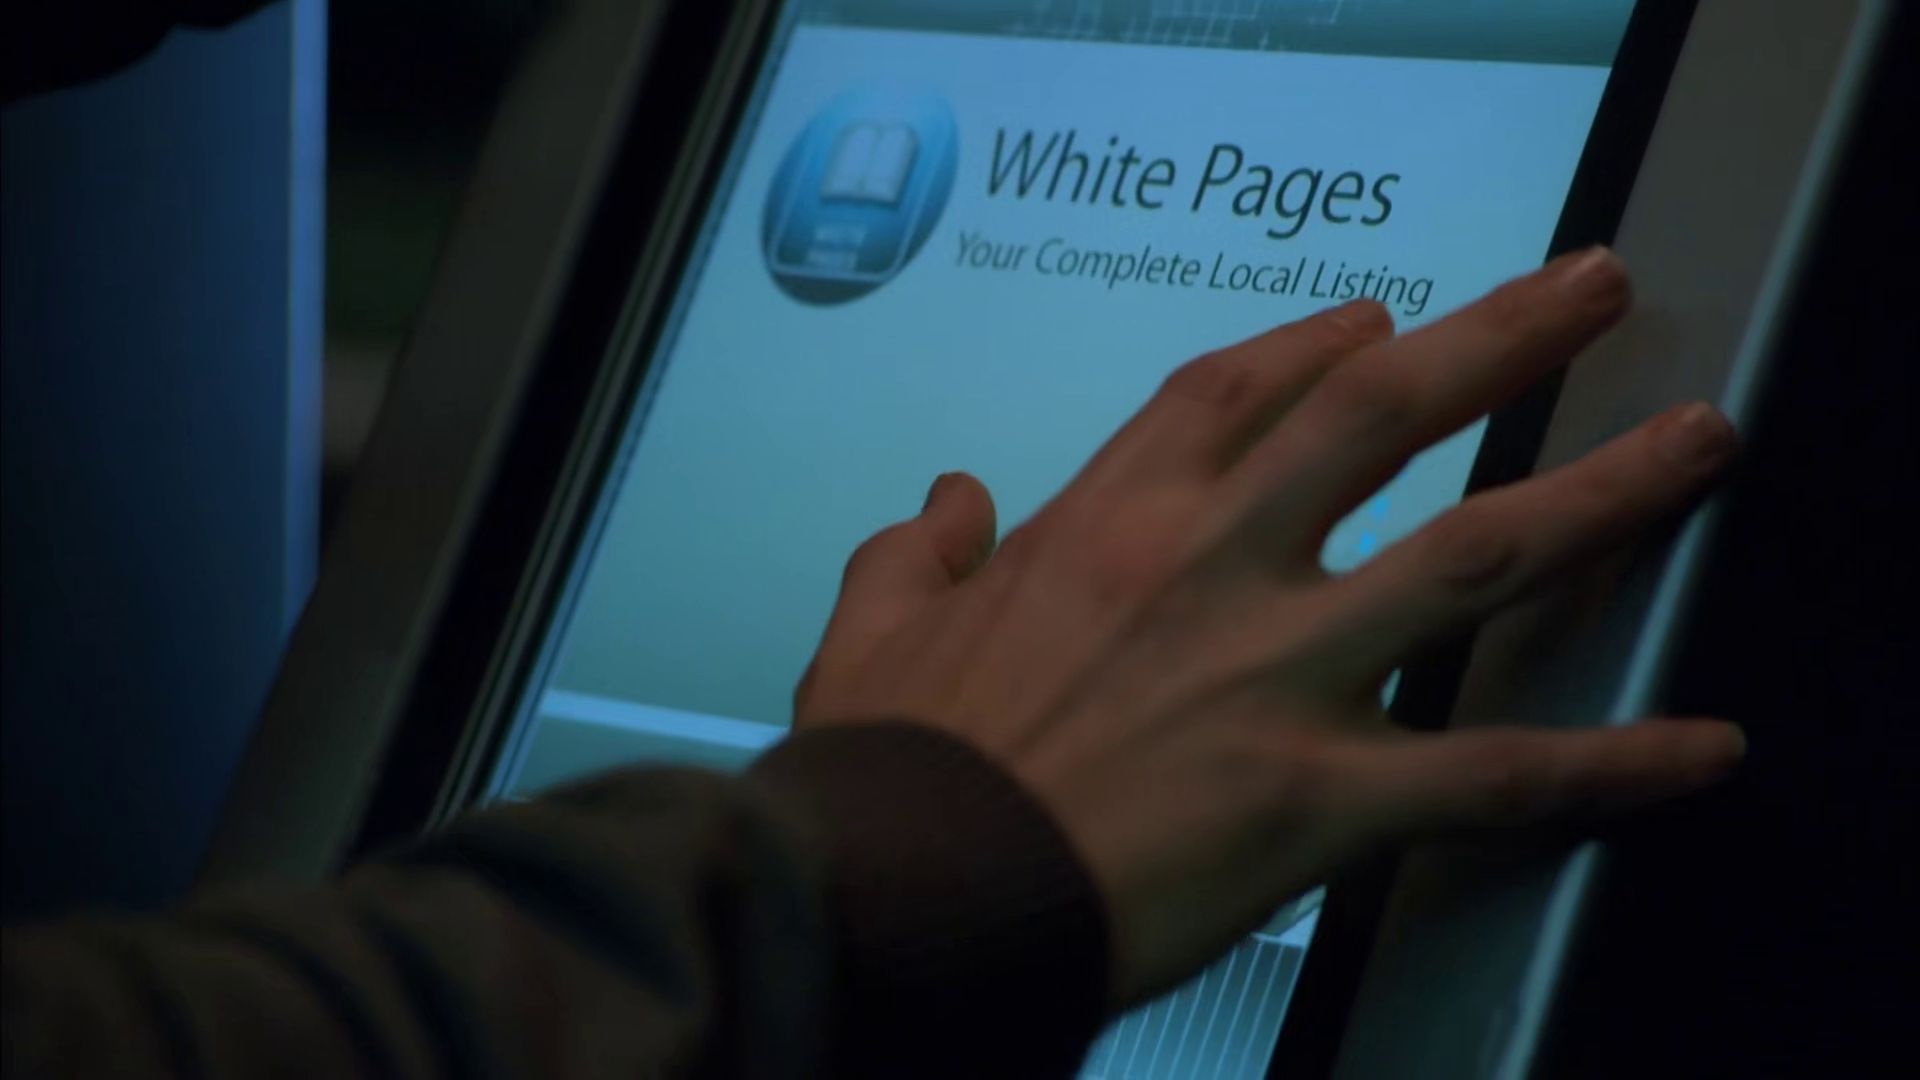 Redverse: <b>Image 8:</b> The White Pages